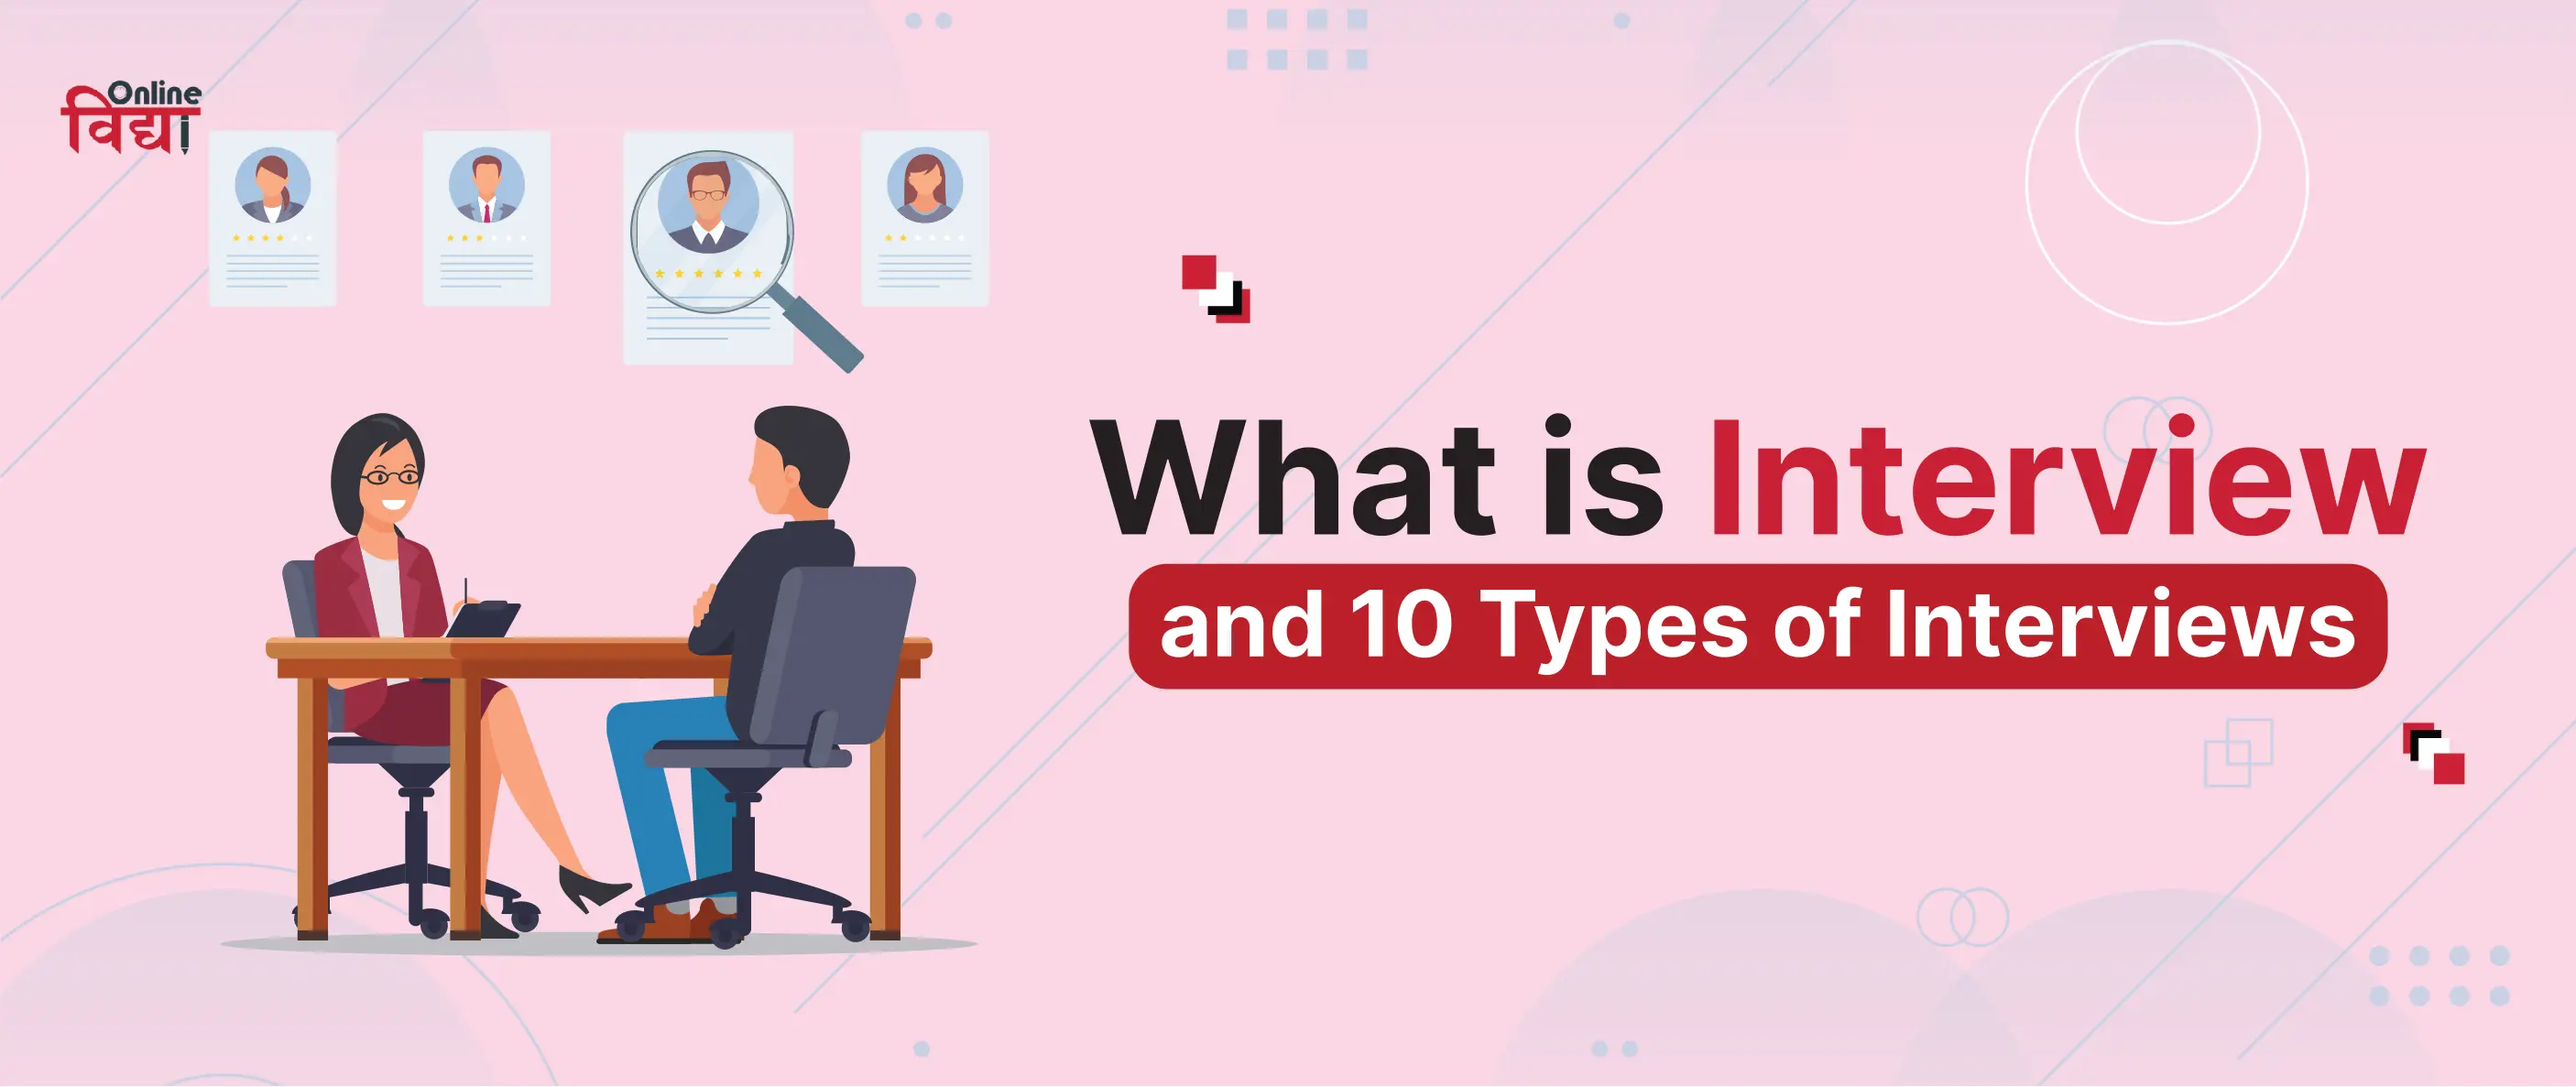 What is an Interview and 10 Types of Interviews